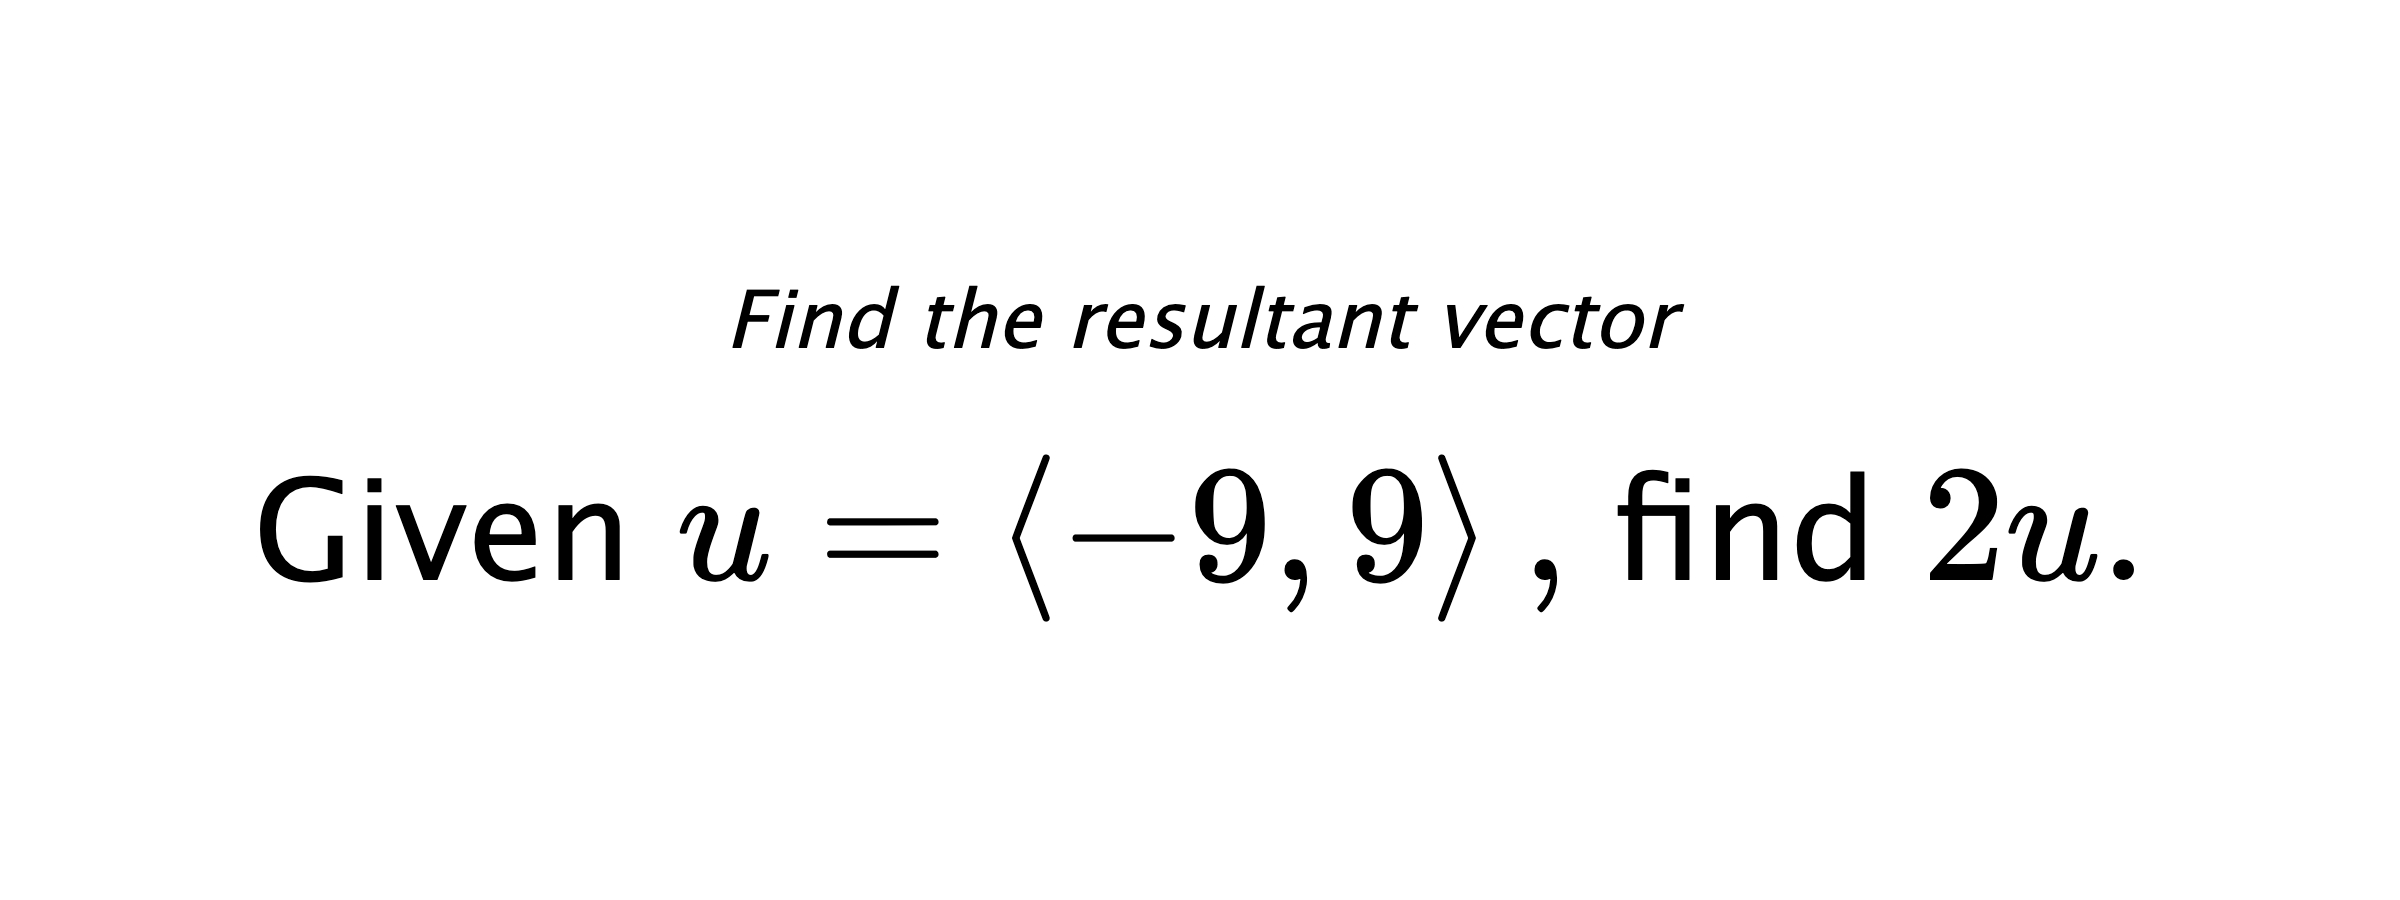 Find the resultant vector Given $ u = \left< -9,9 \right> ,$ find $ 2u .$